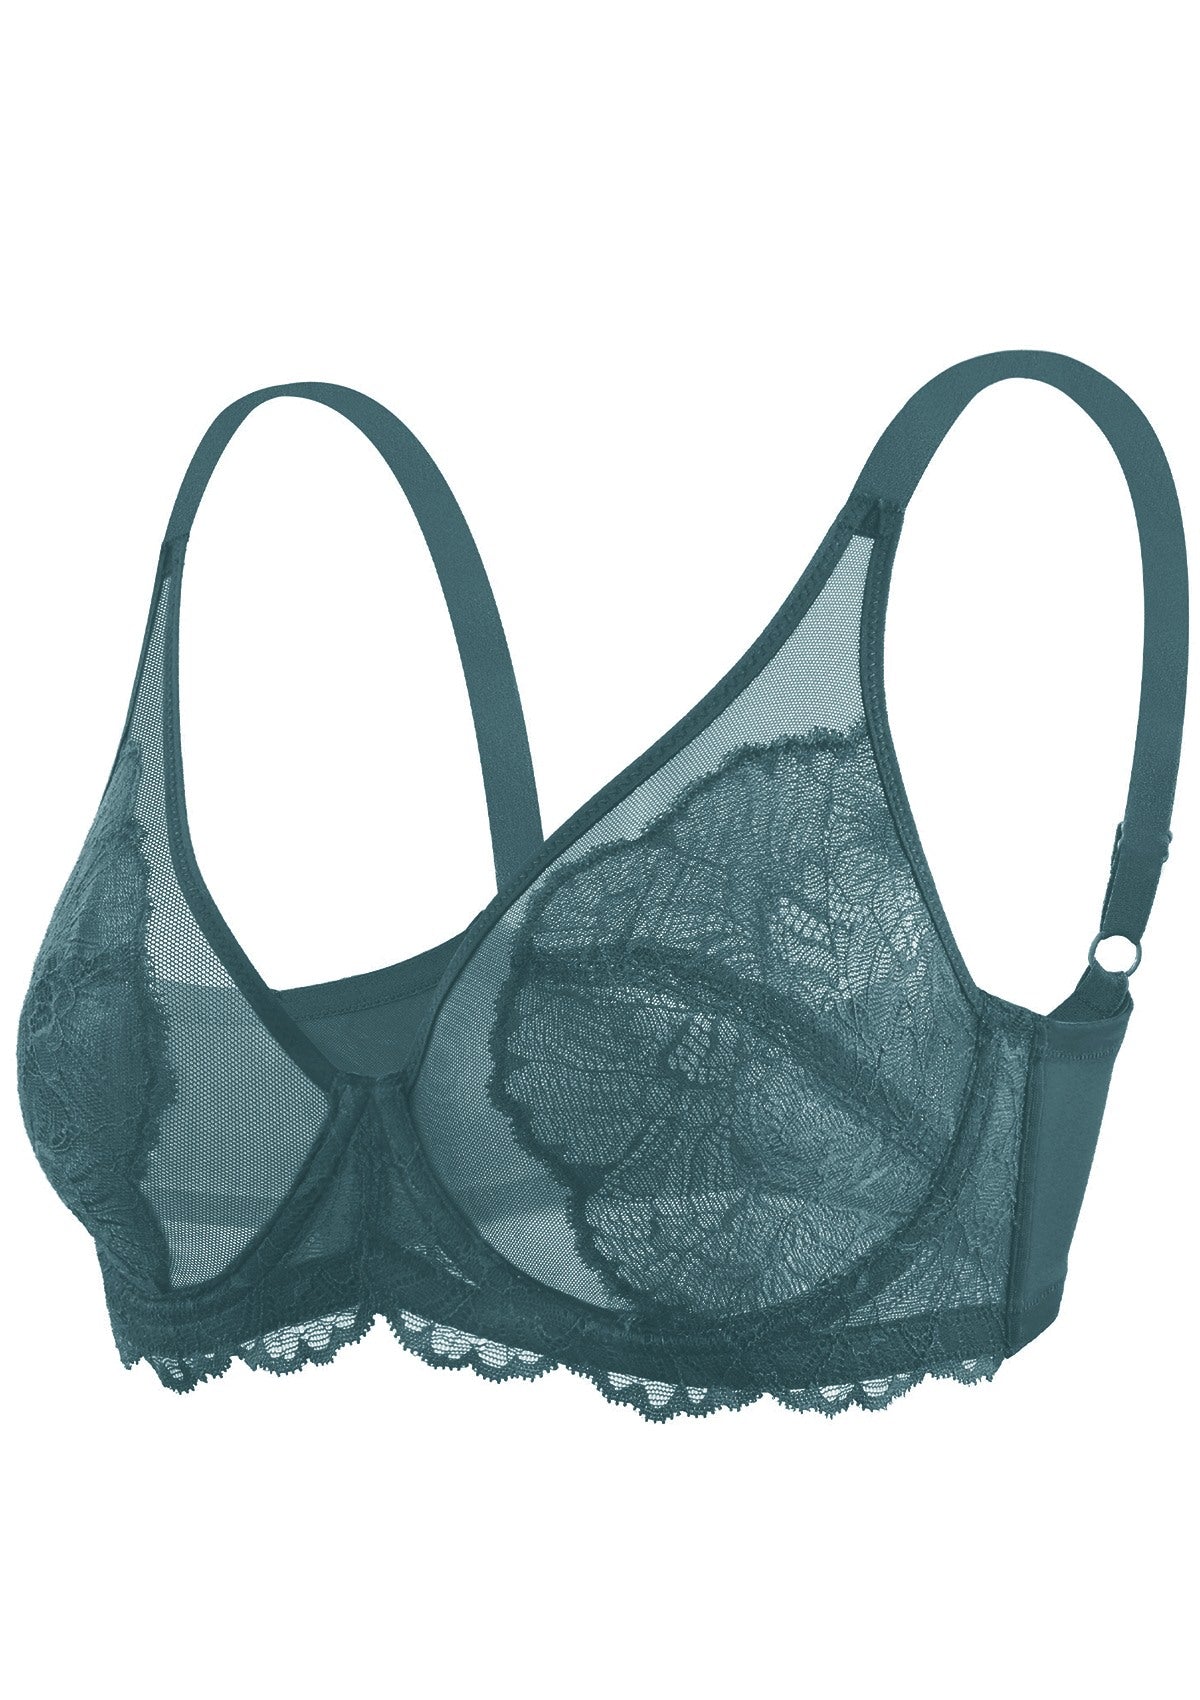 HSIA Blossom Full Figure See-Through Lace Bra For Side And Back Fat - Dark Blue / 34 / DD/E